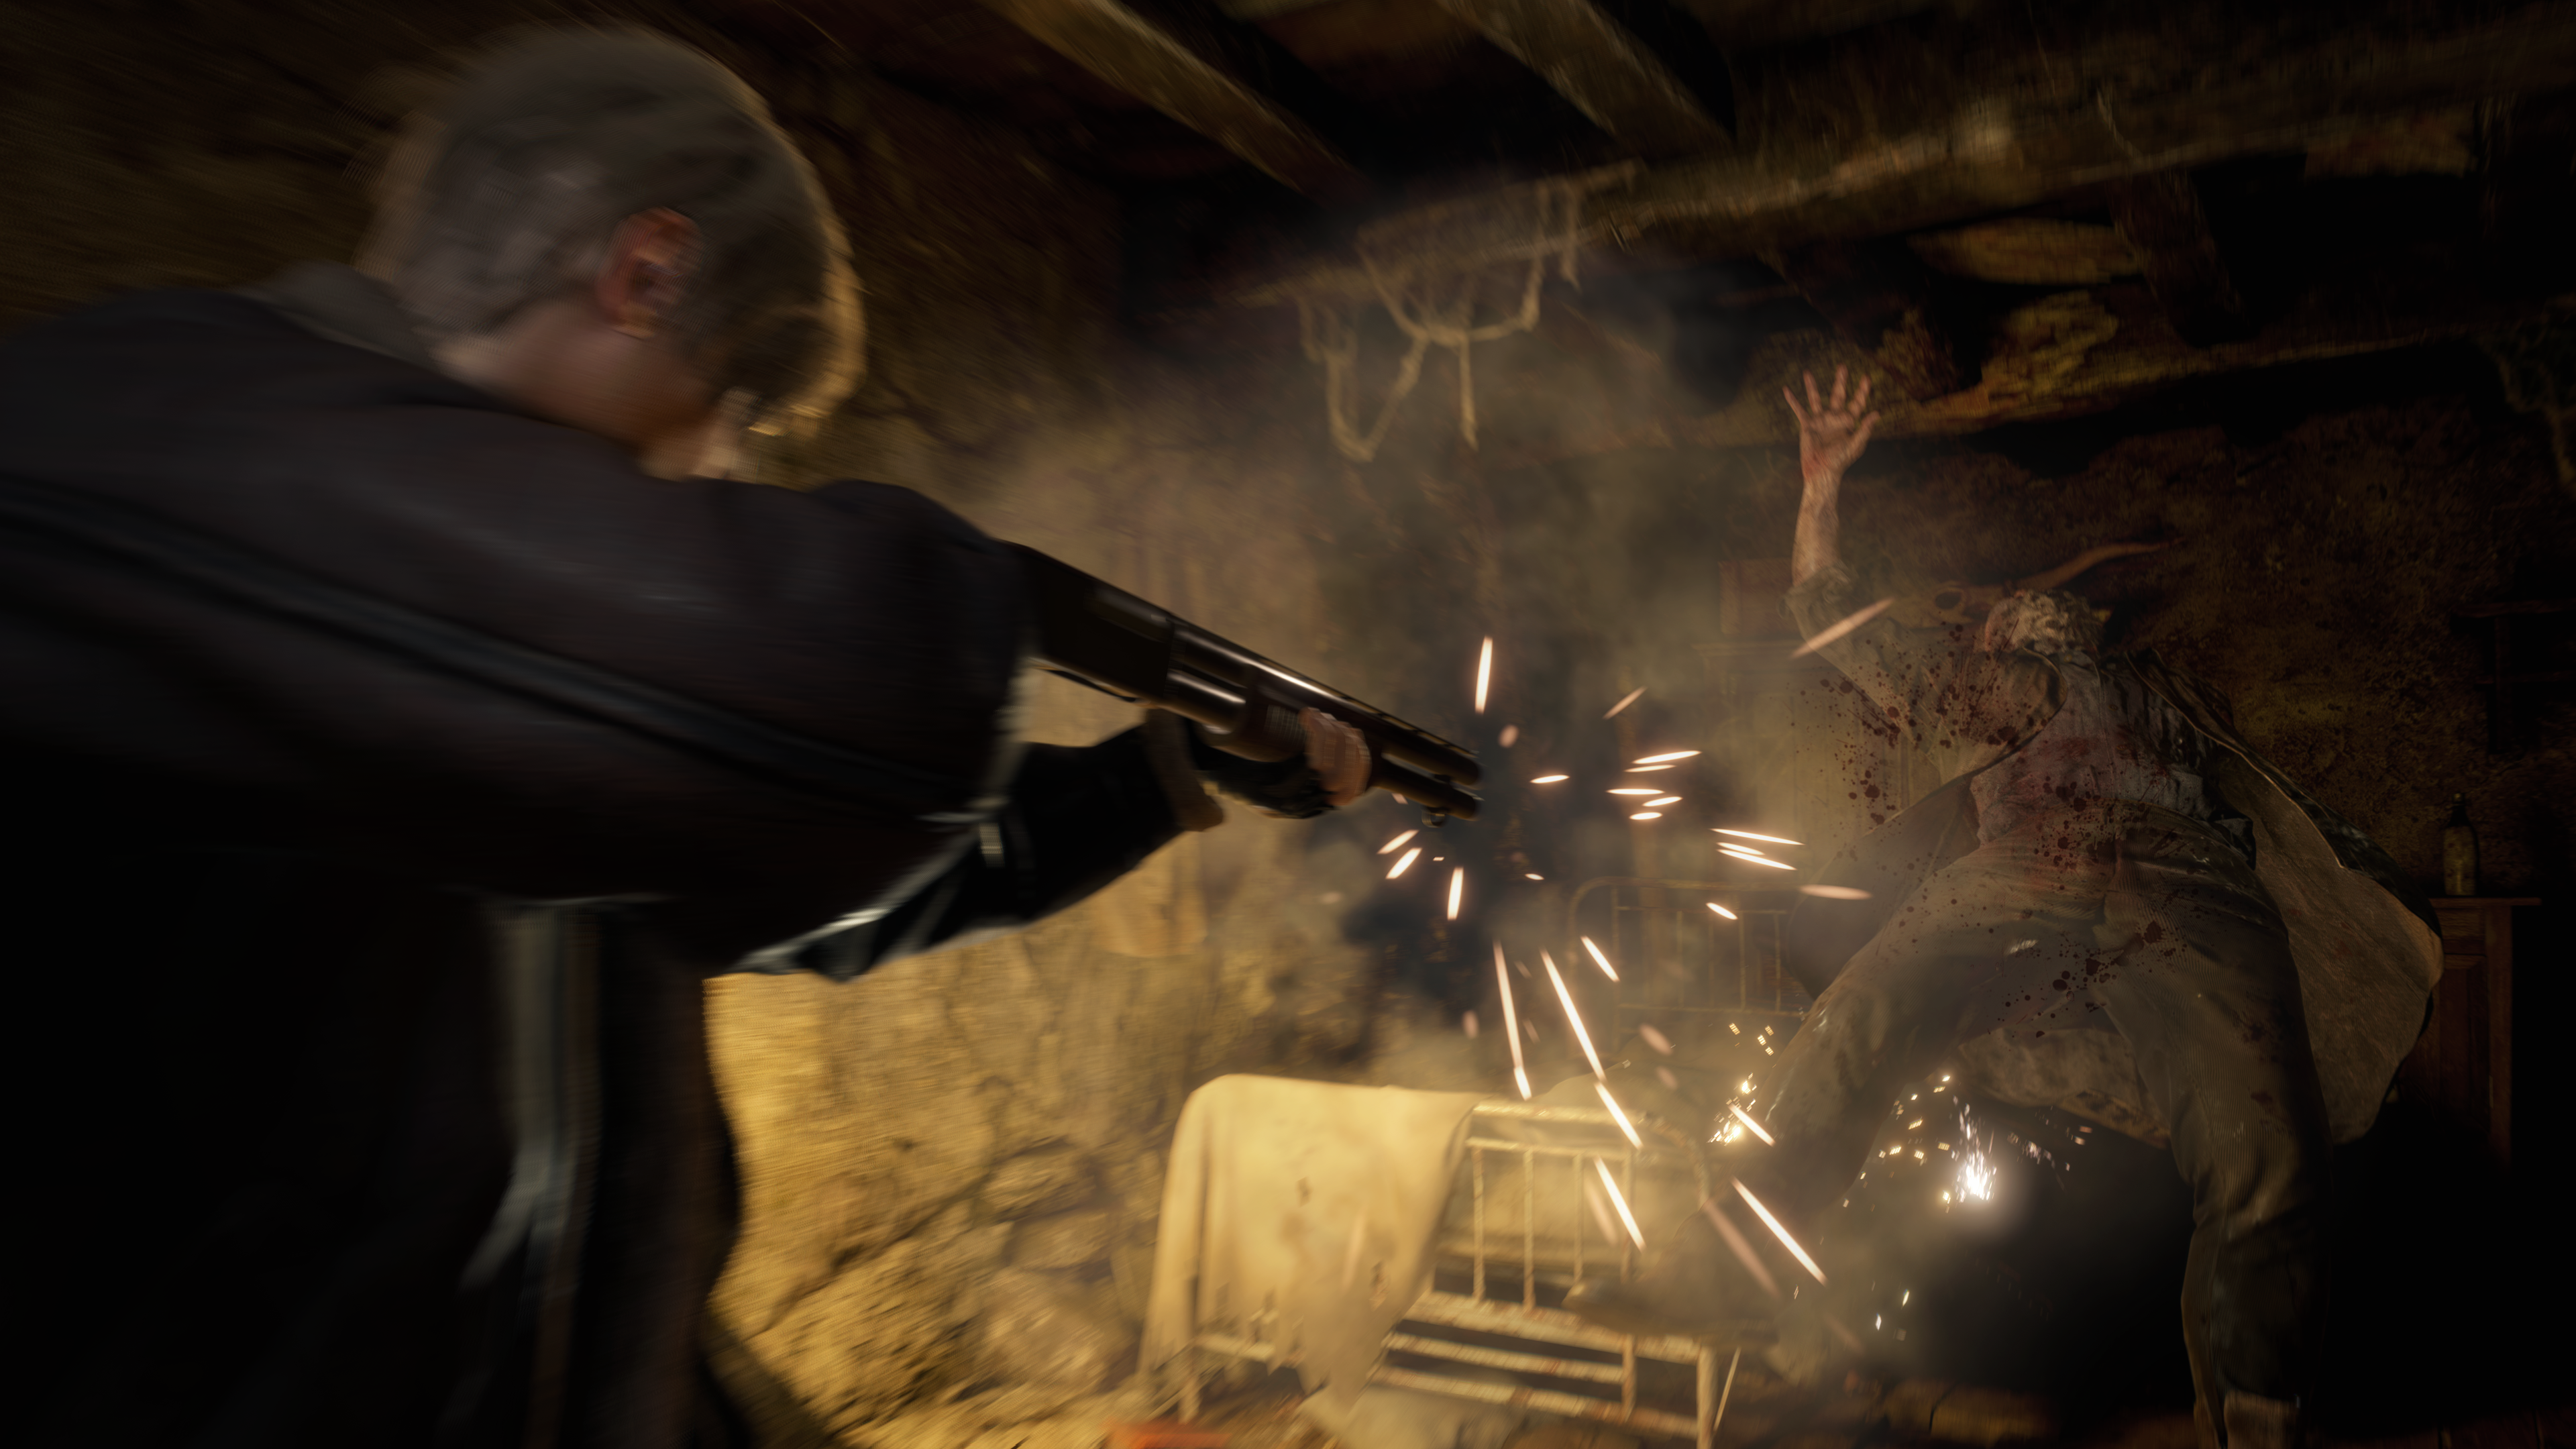 Leon uses a shotgun to blast a villager away in the Resident Evil 4 remake